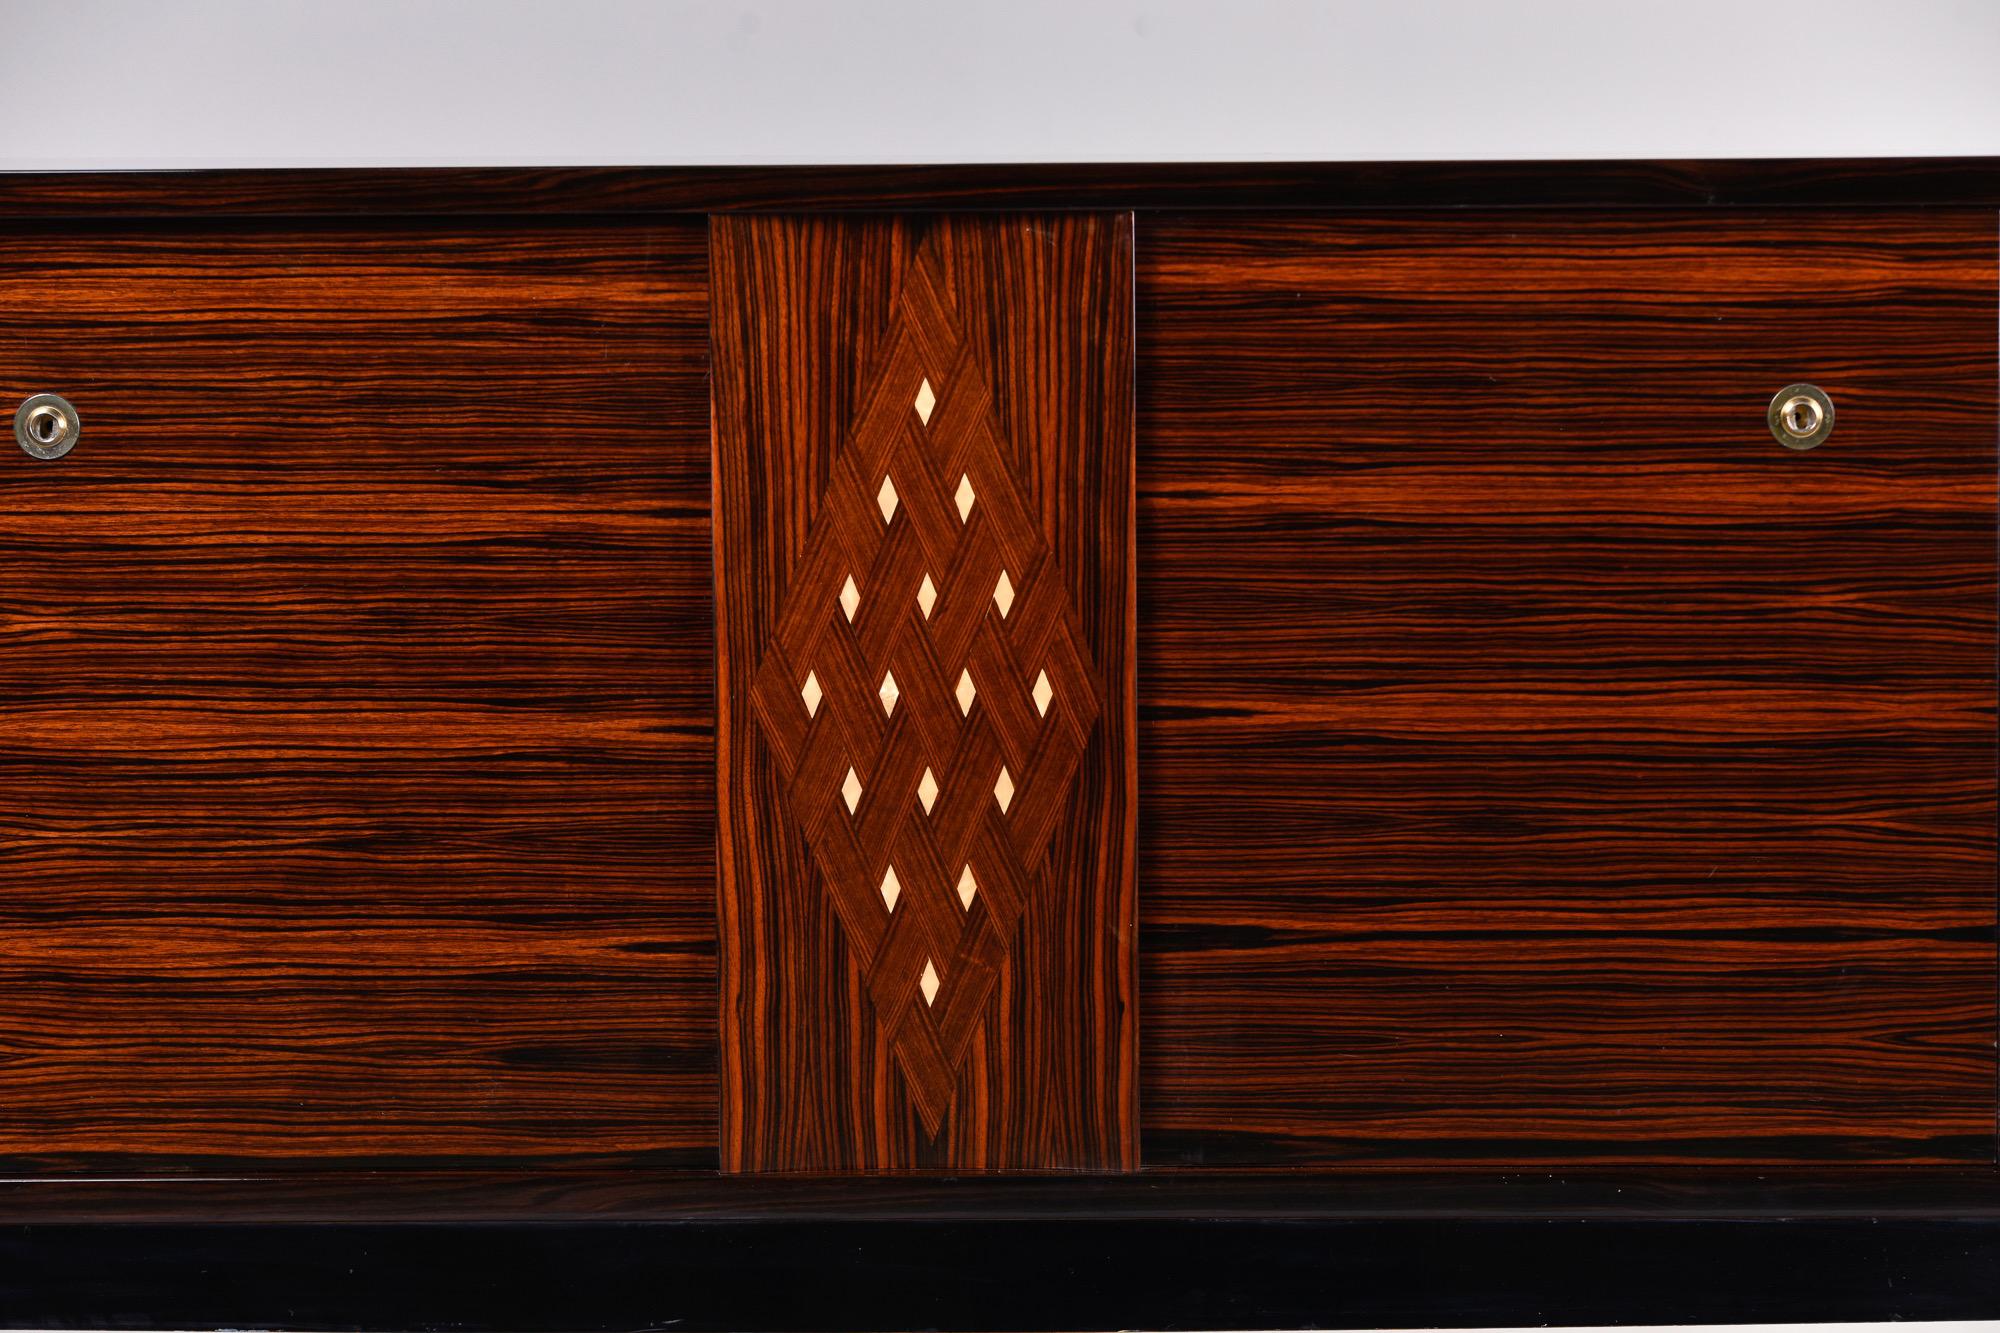 20th Century French Deco Modernist Macassar Buffet or Credenza with Diamond Pattern Inlay